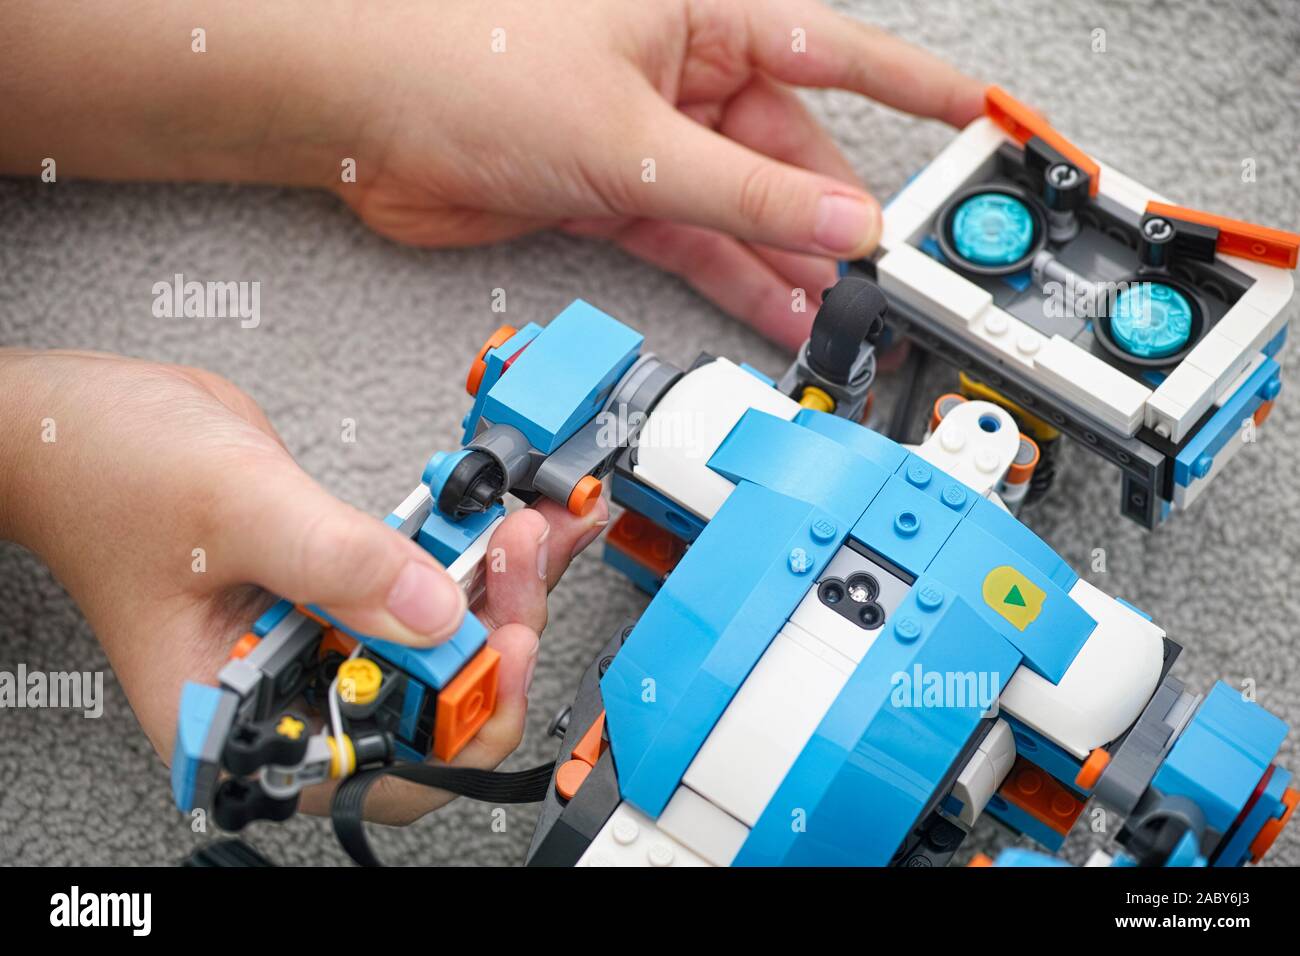 Tambov, Russian Federation - November 20, 2019 Lego Boost Vernie the Robot in hands. Close up. Stock Photo